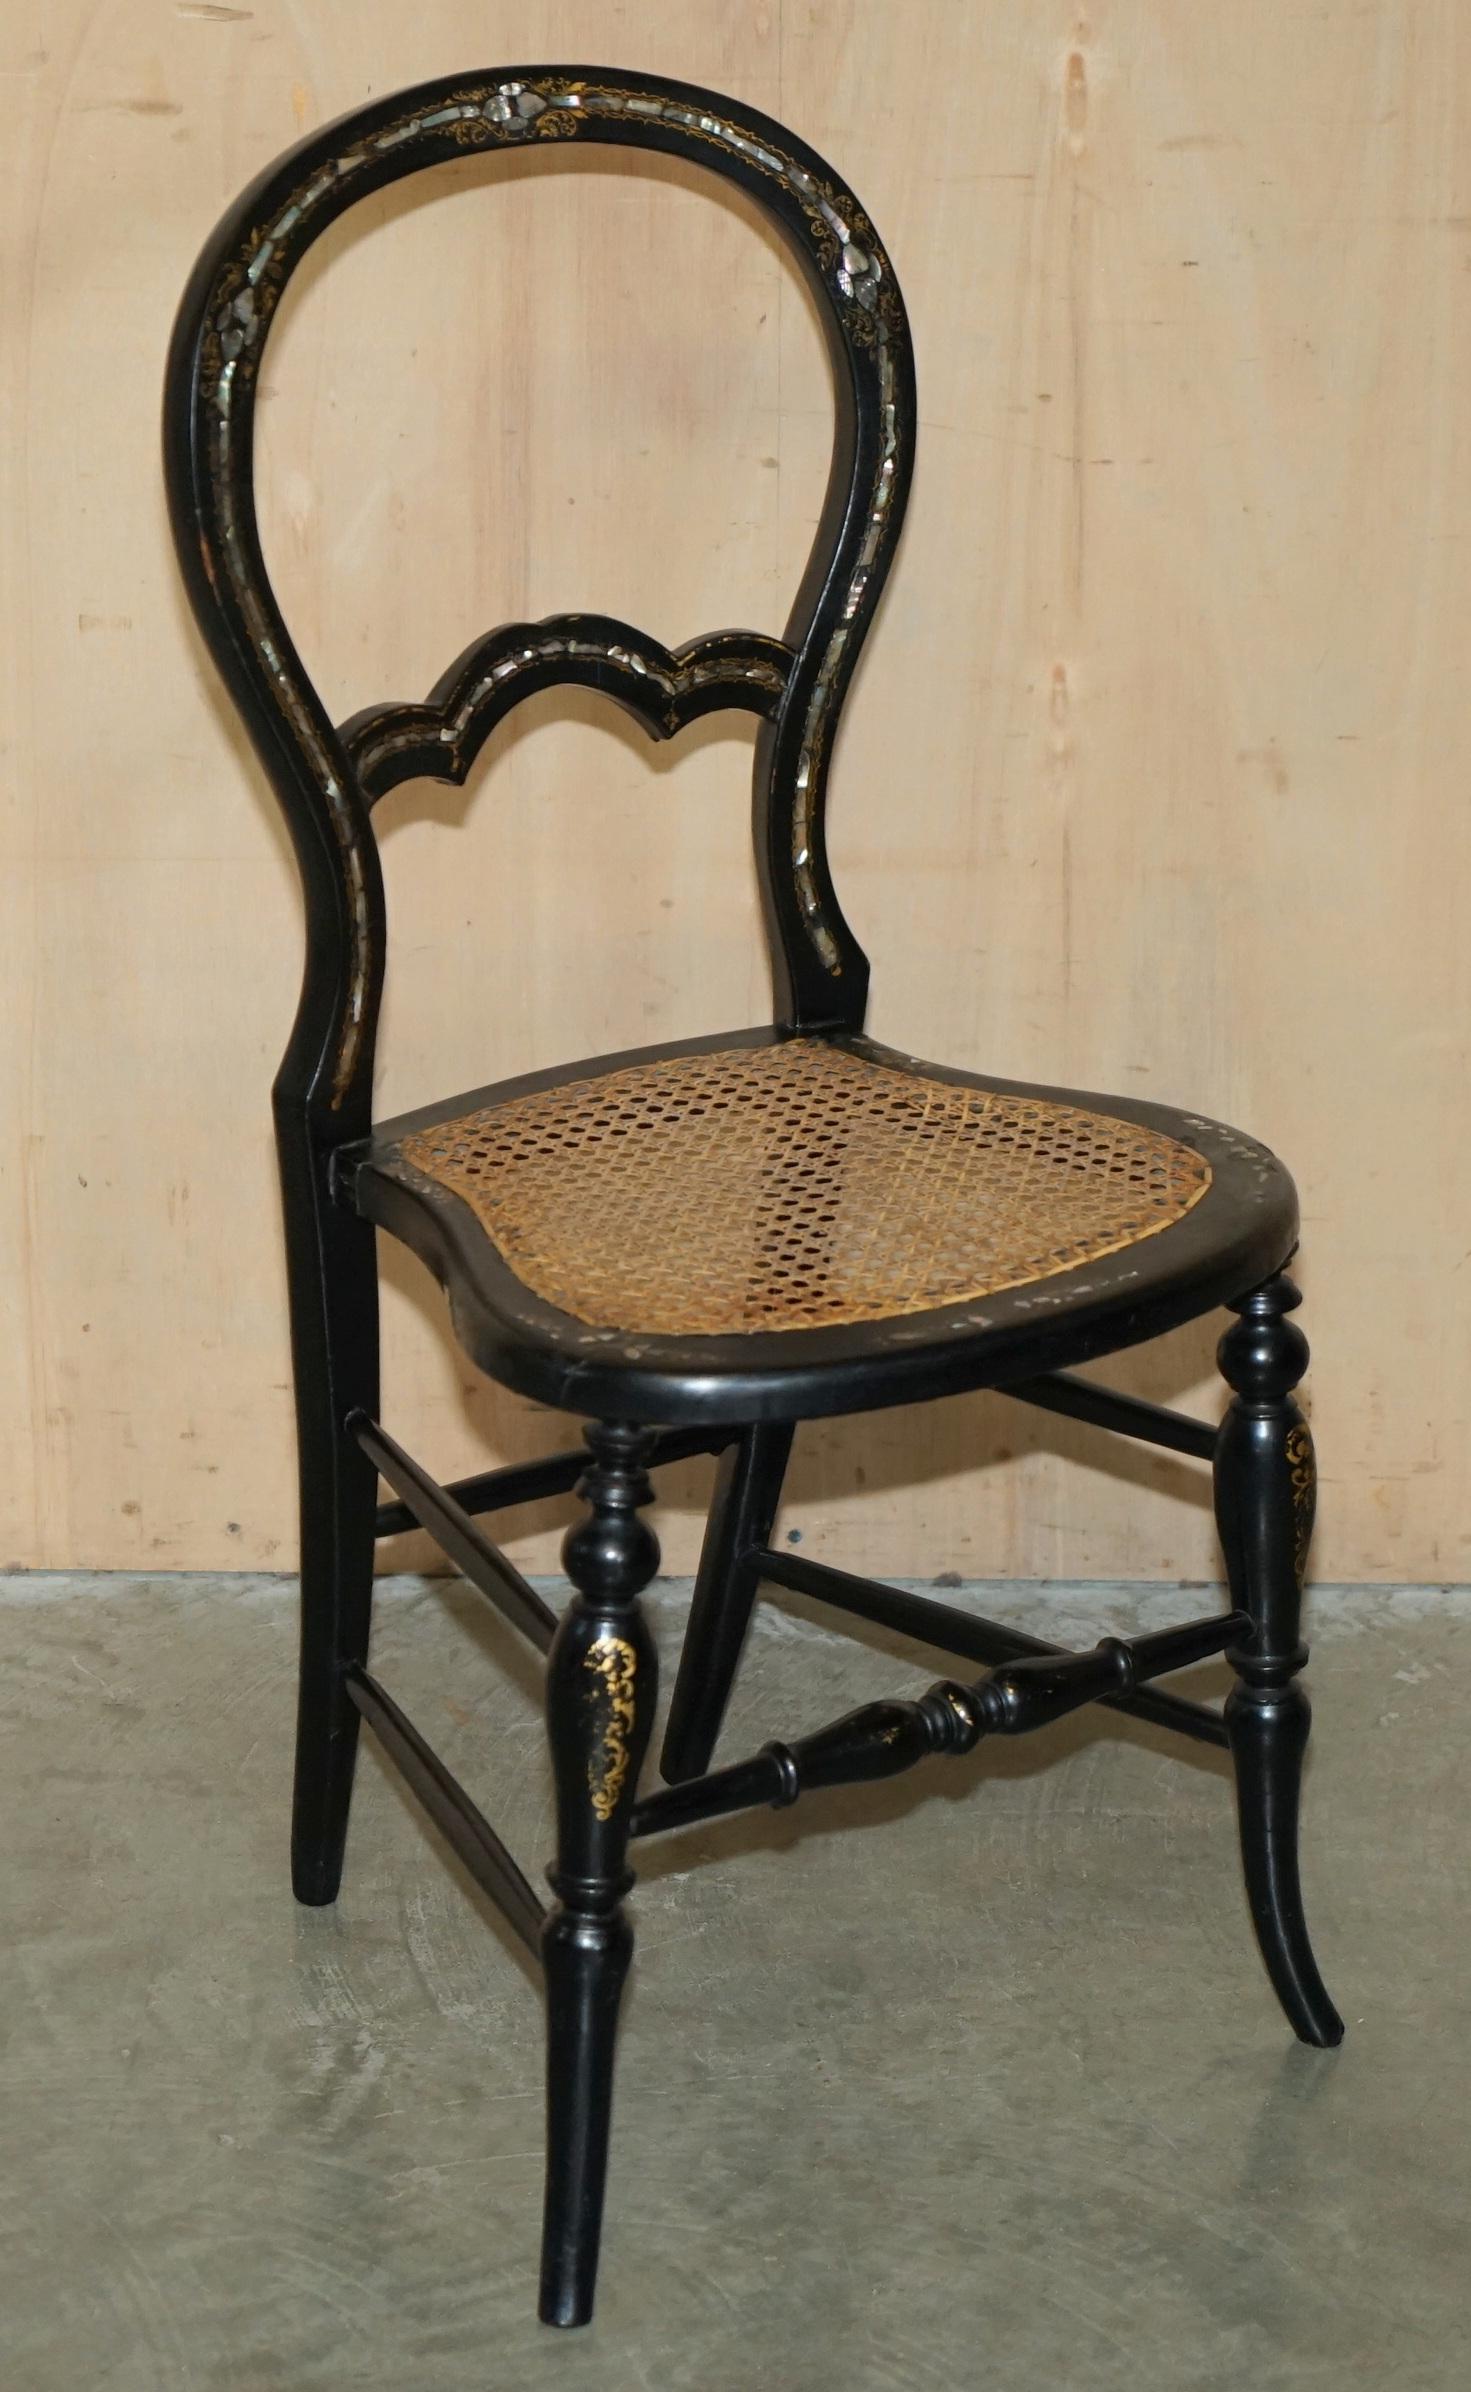 VIER FINE UND ANTIQUE REGENCY BERGERE MOTHER OF PEARL EBONISED SIDE CHAIRs im Angebot 9